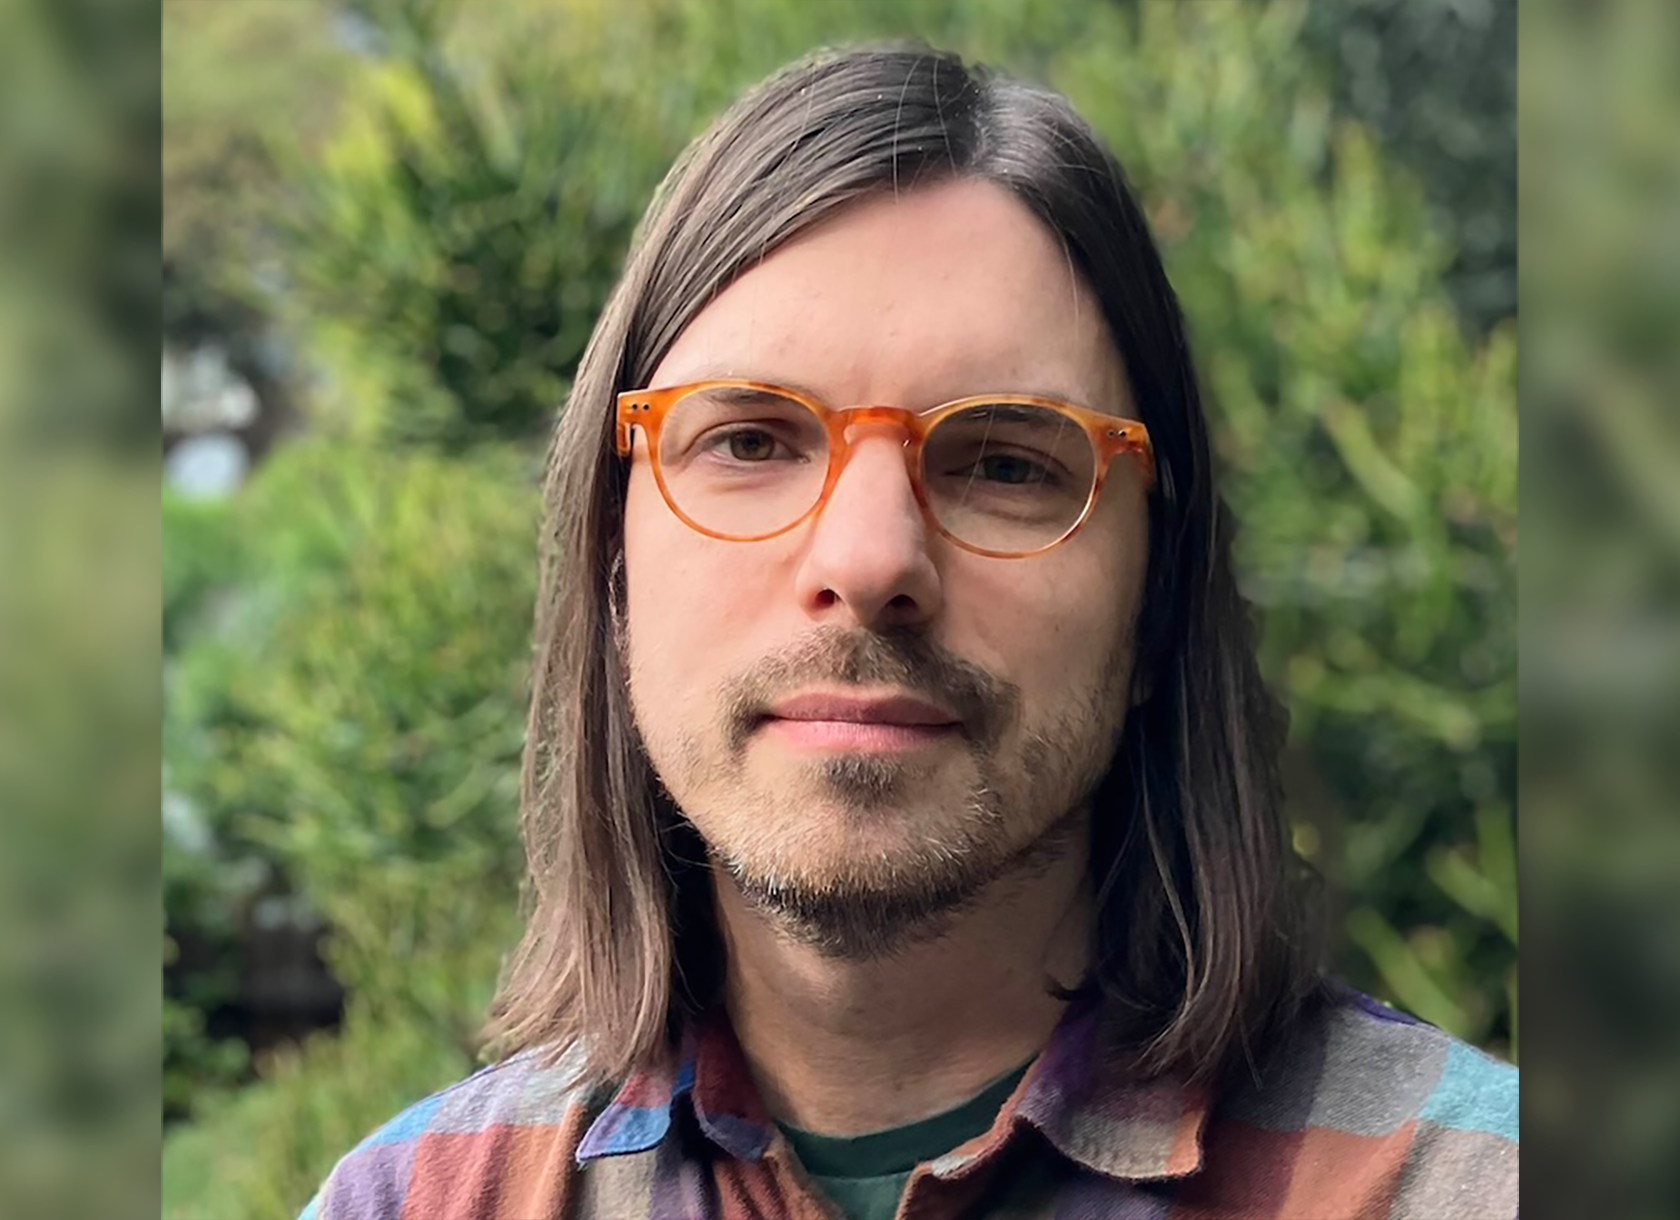 Portrait photo of Assistant Professor of Philosophy Martin Glazier, a white man with brown hair and orange glasses.